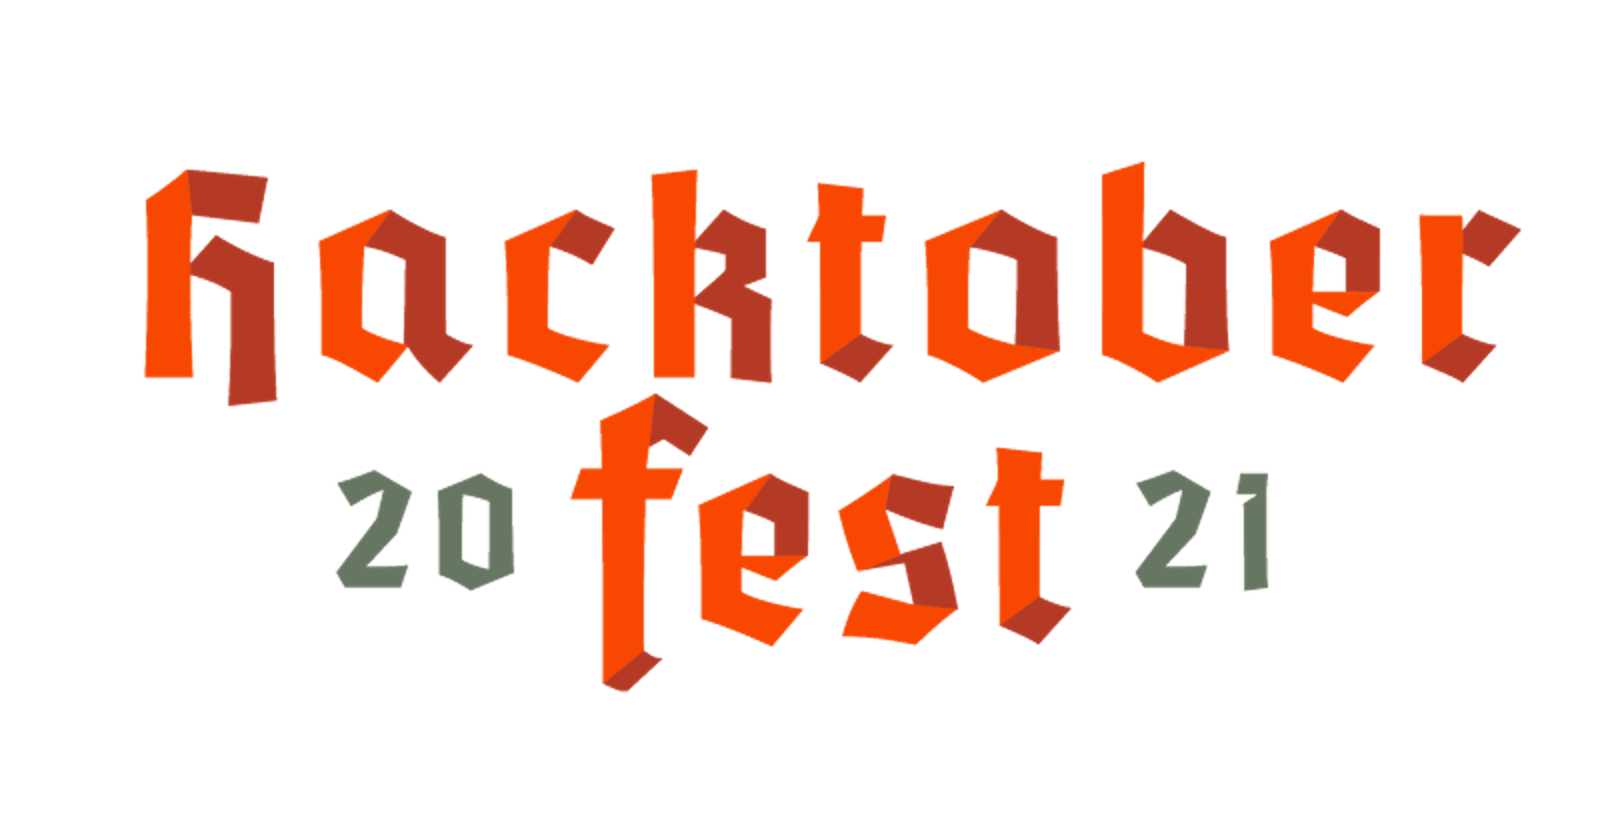 Hacktoberfest 2021: Finding Projects That Aren't Excluded